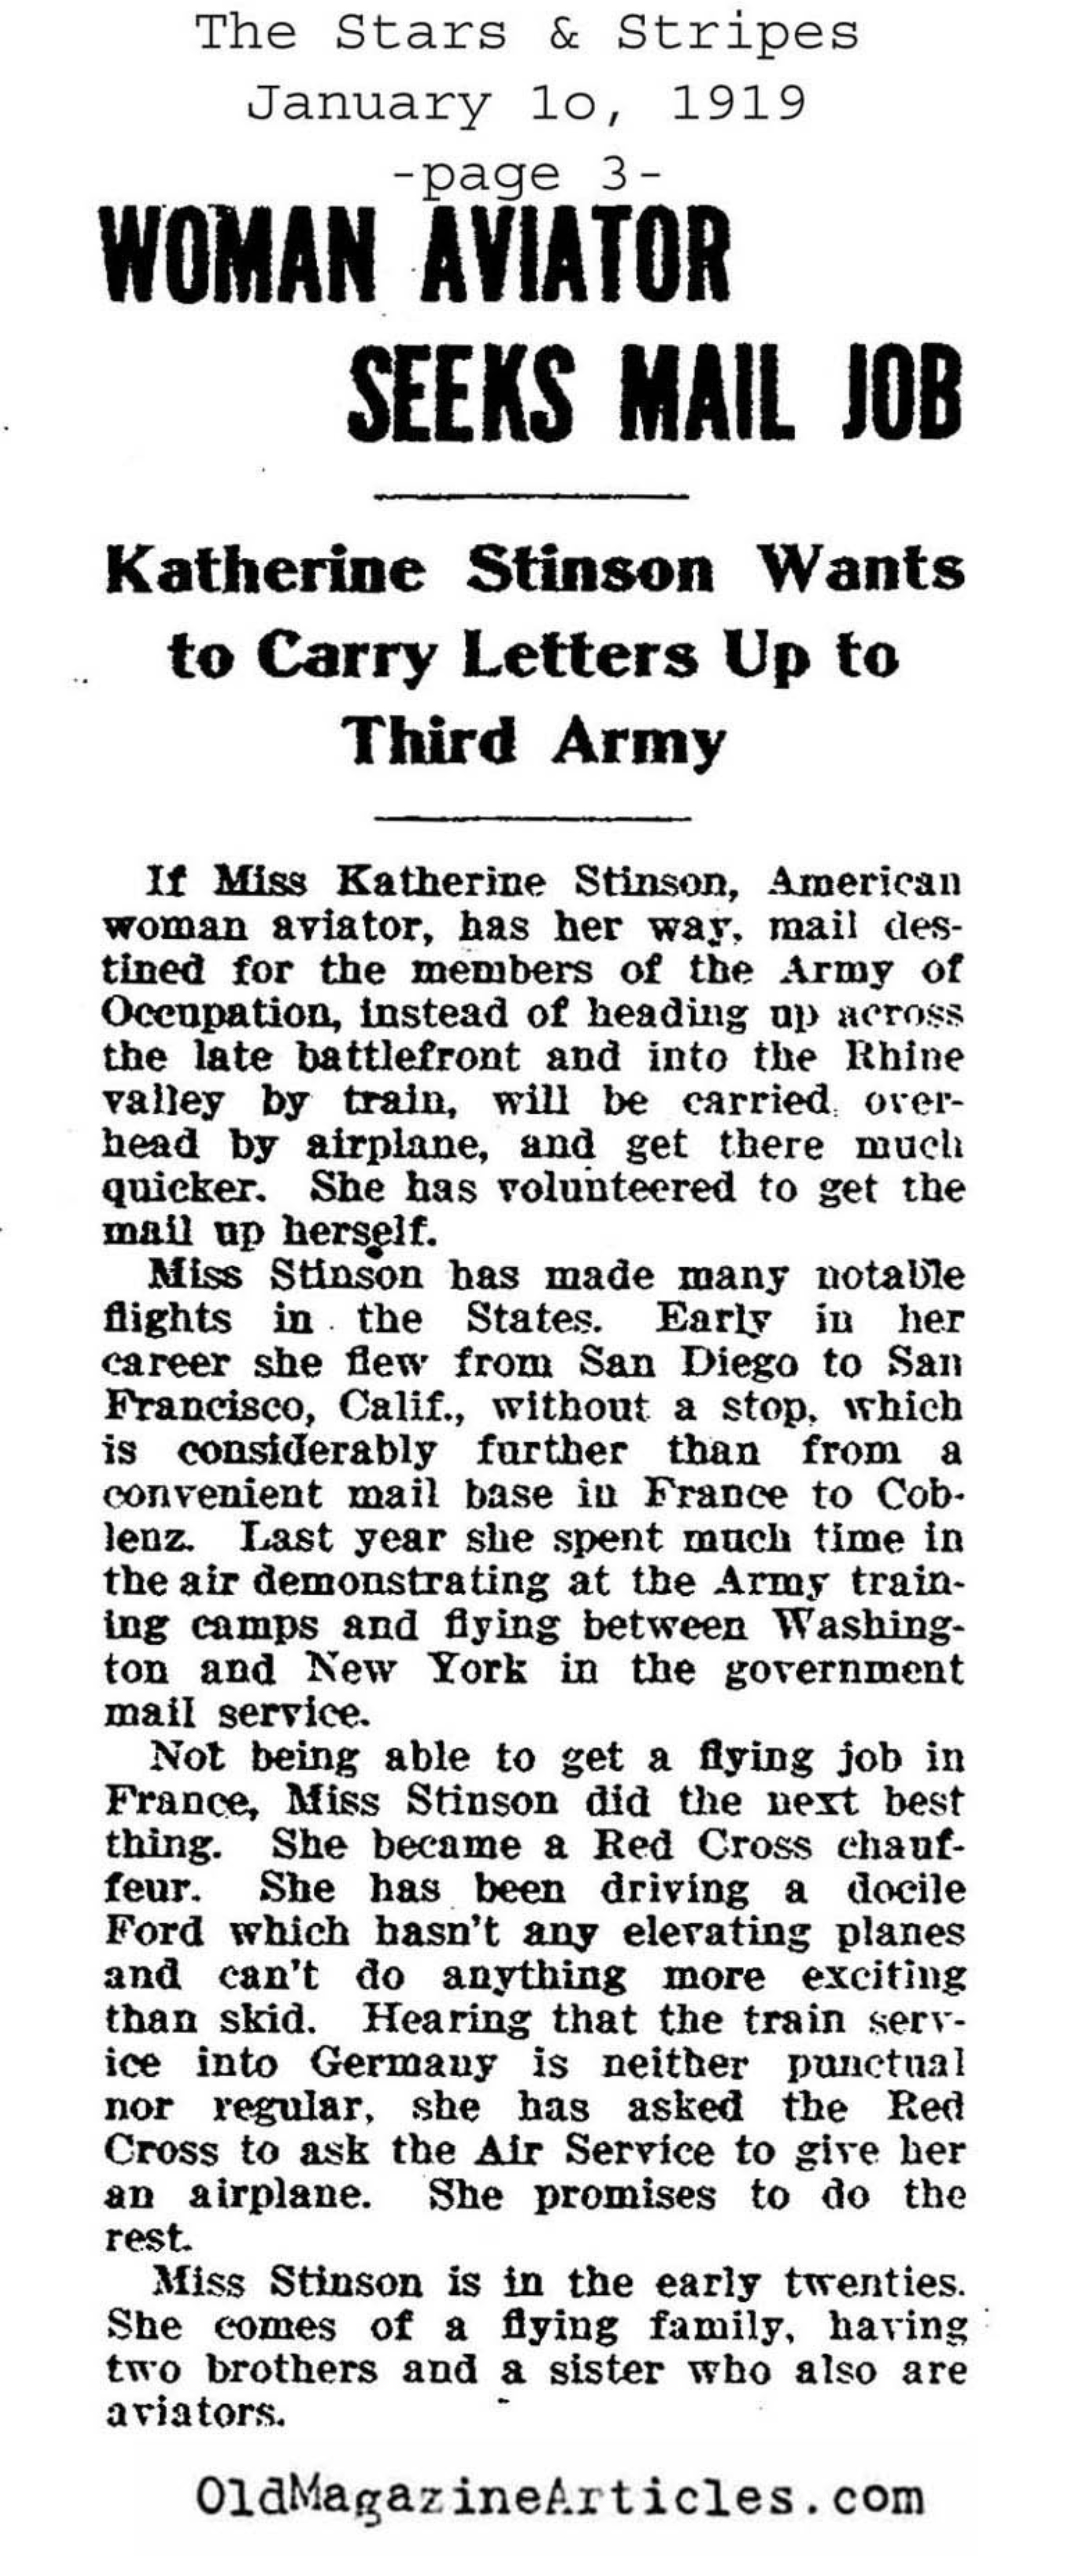 Katherine Stinson Offers Her Services to the Army  (The Stars and Stripes, 1919)